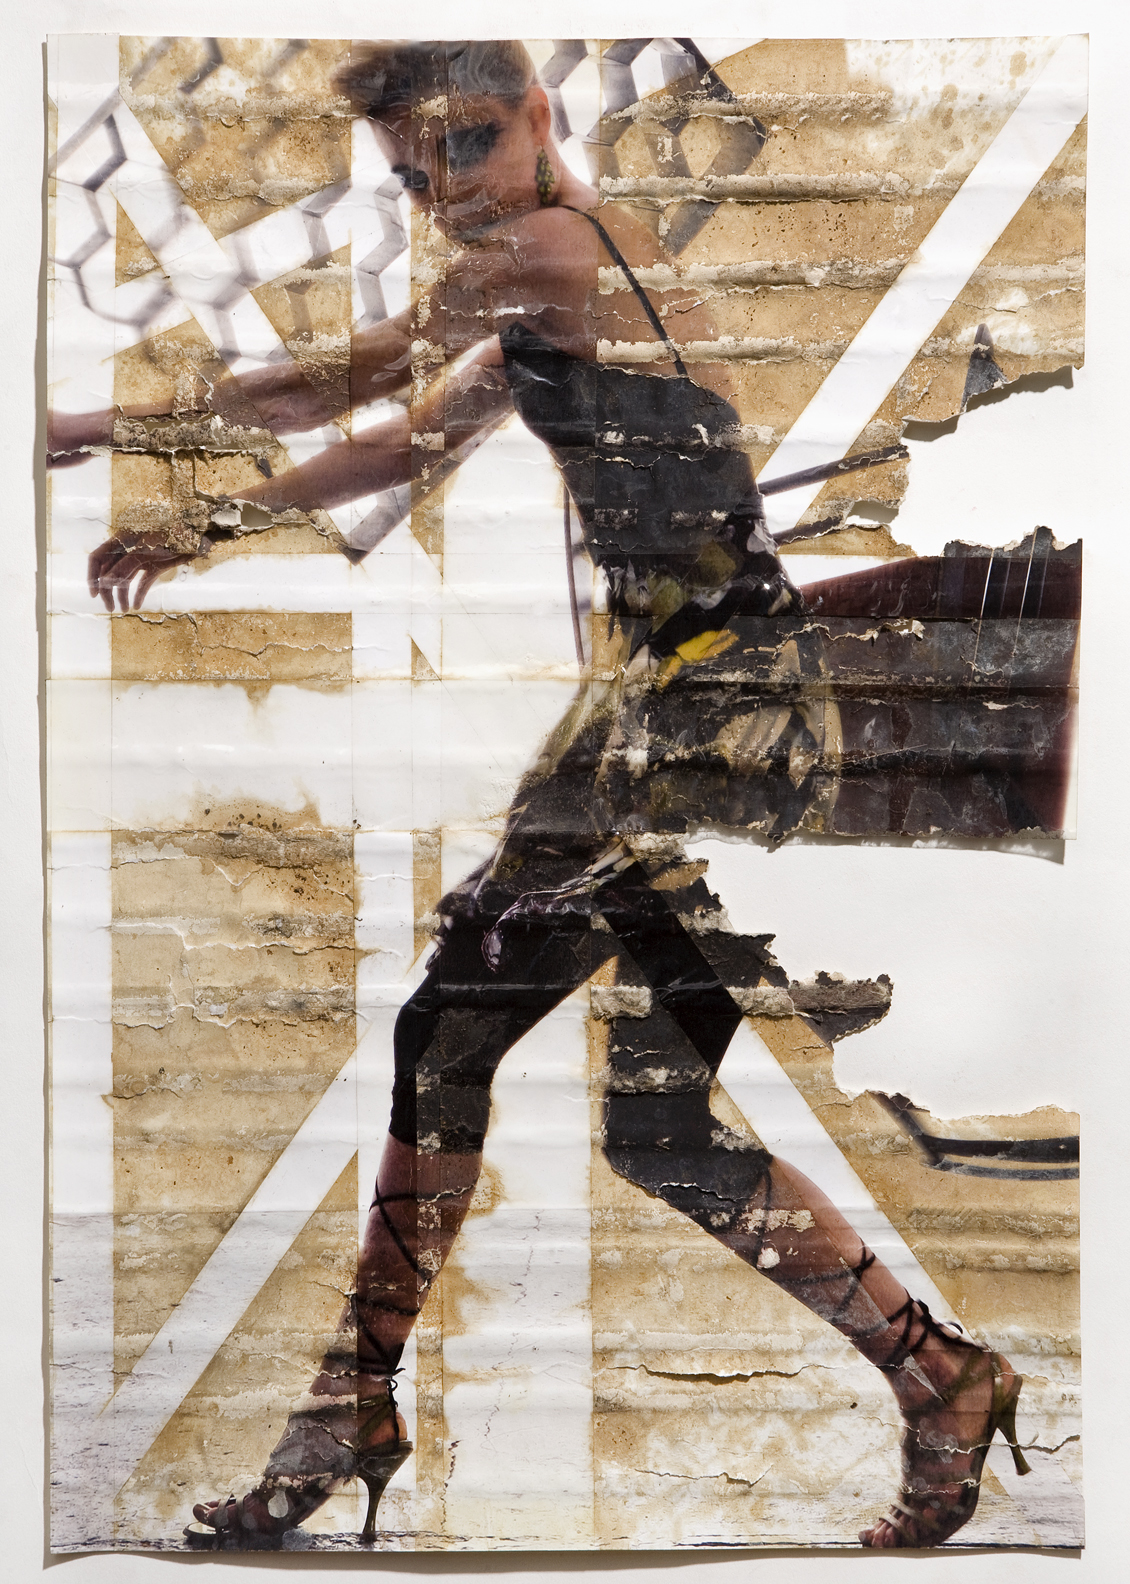 Untitled, inkjet print, packing tape, coffee, coffee grounds, milk, 13"x19", 2010